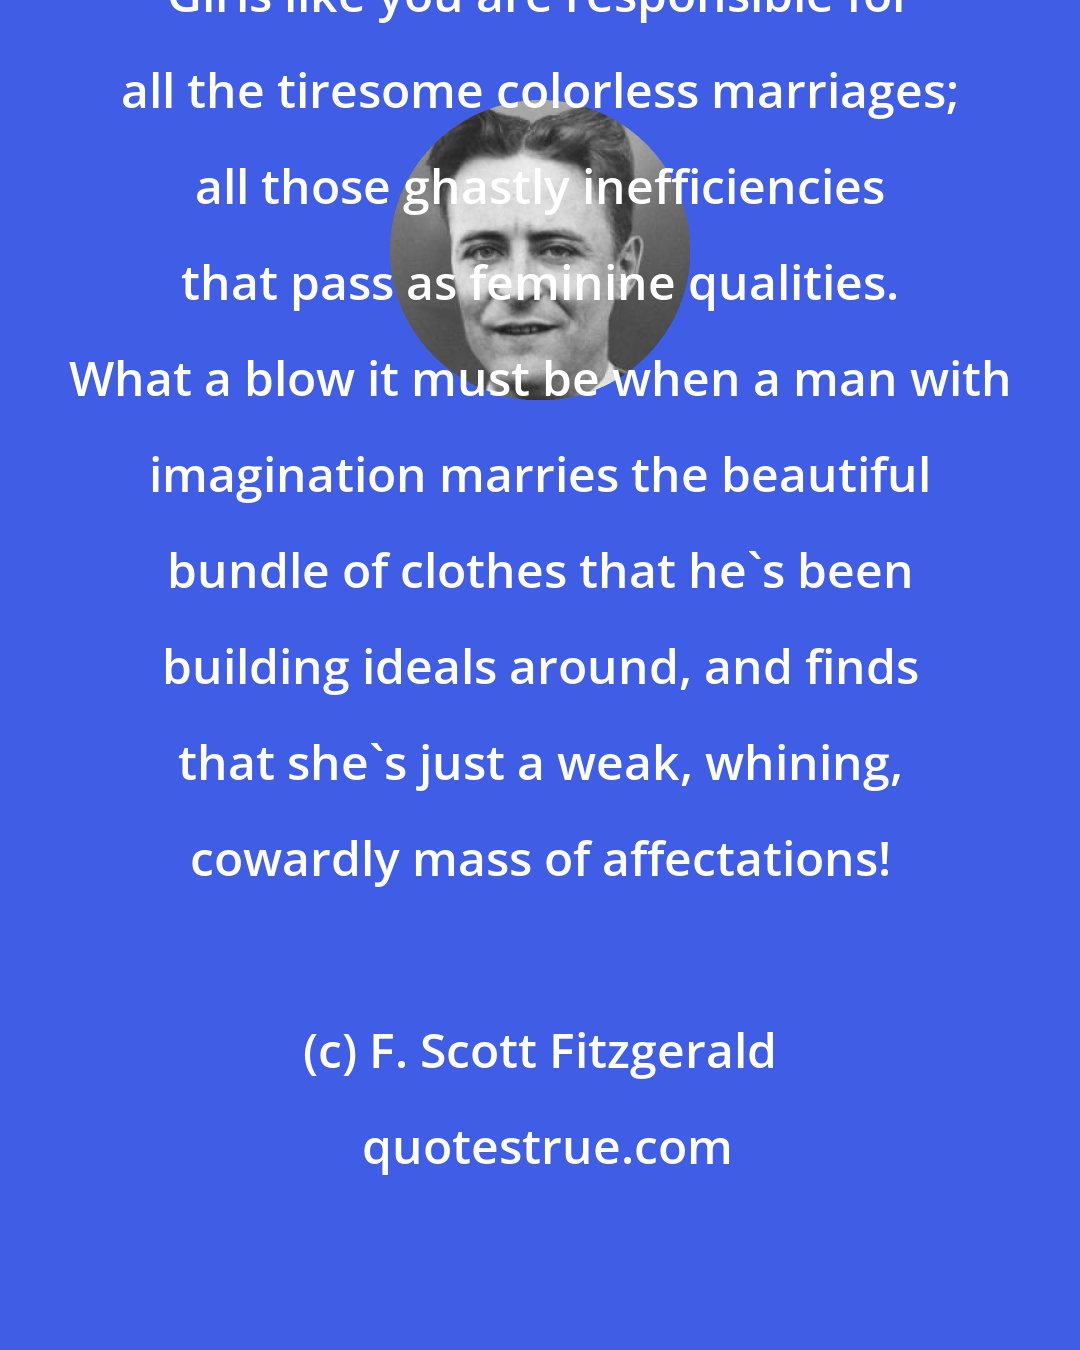 F. Scott Fitzgerald: Girls like you are responsible for all the tiresome colorless marriages; all those ghastly inefficiencies that pass as feminine qualities. What a blow it must be when a man with imagination marries the beautiful bundle of clothes that he's been building ideals around, and finds that she's just a weak, whining, cowardly mass of affectations!